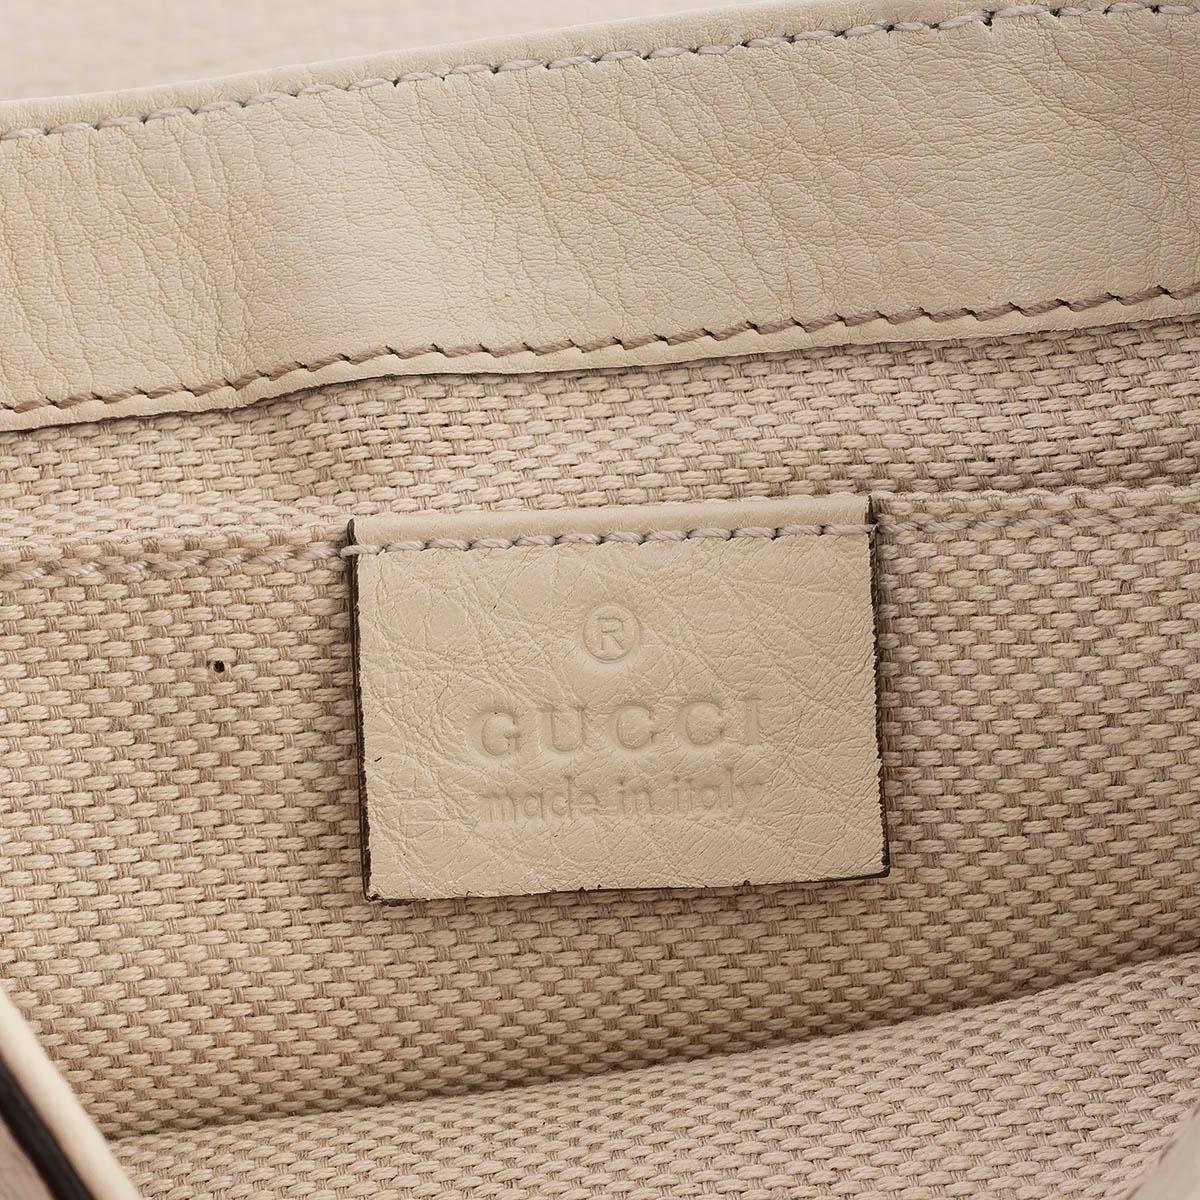 Women's GUCCI ivory leather SMALL SOHO FLAP Shoulder Bag For Sale